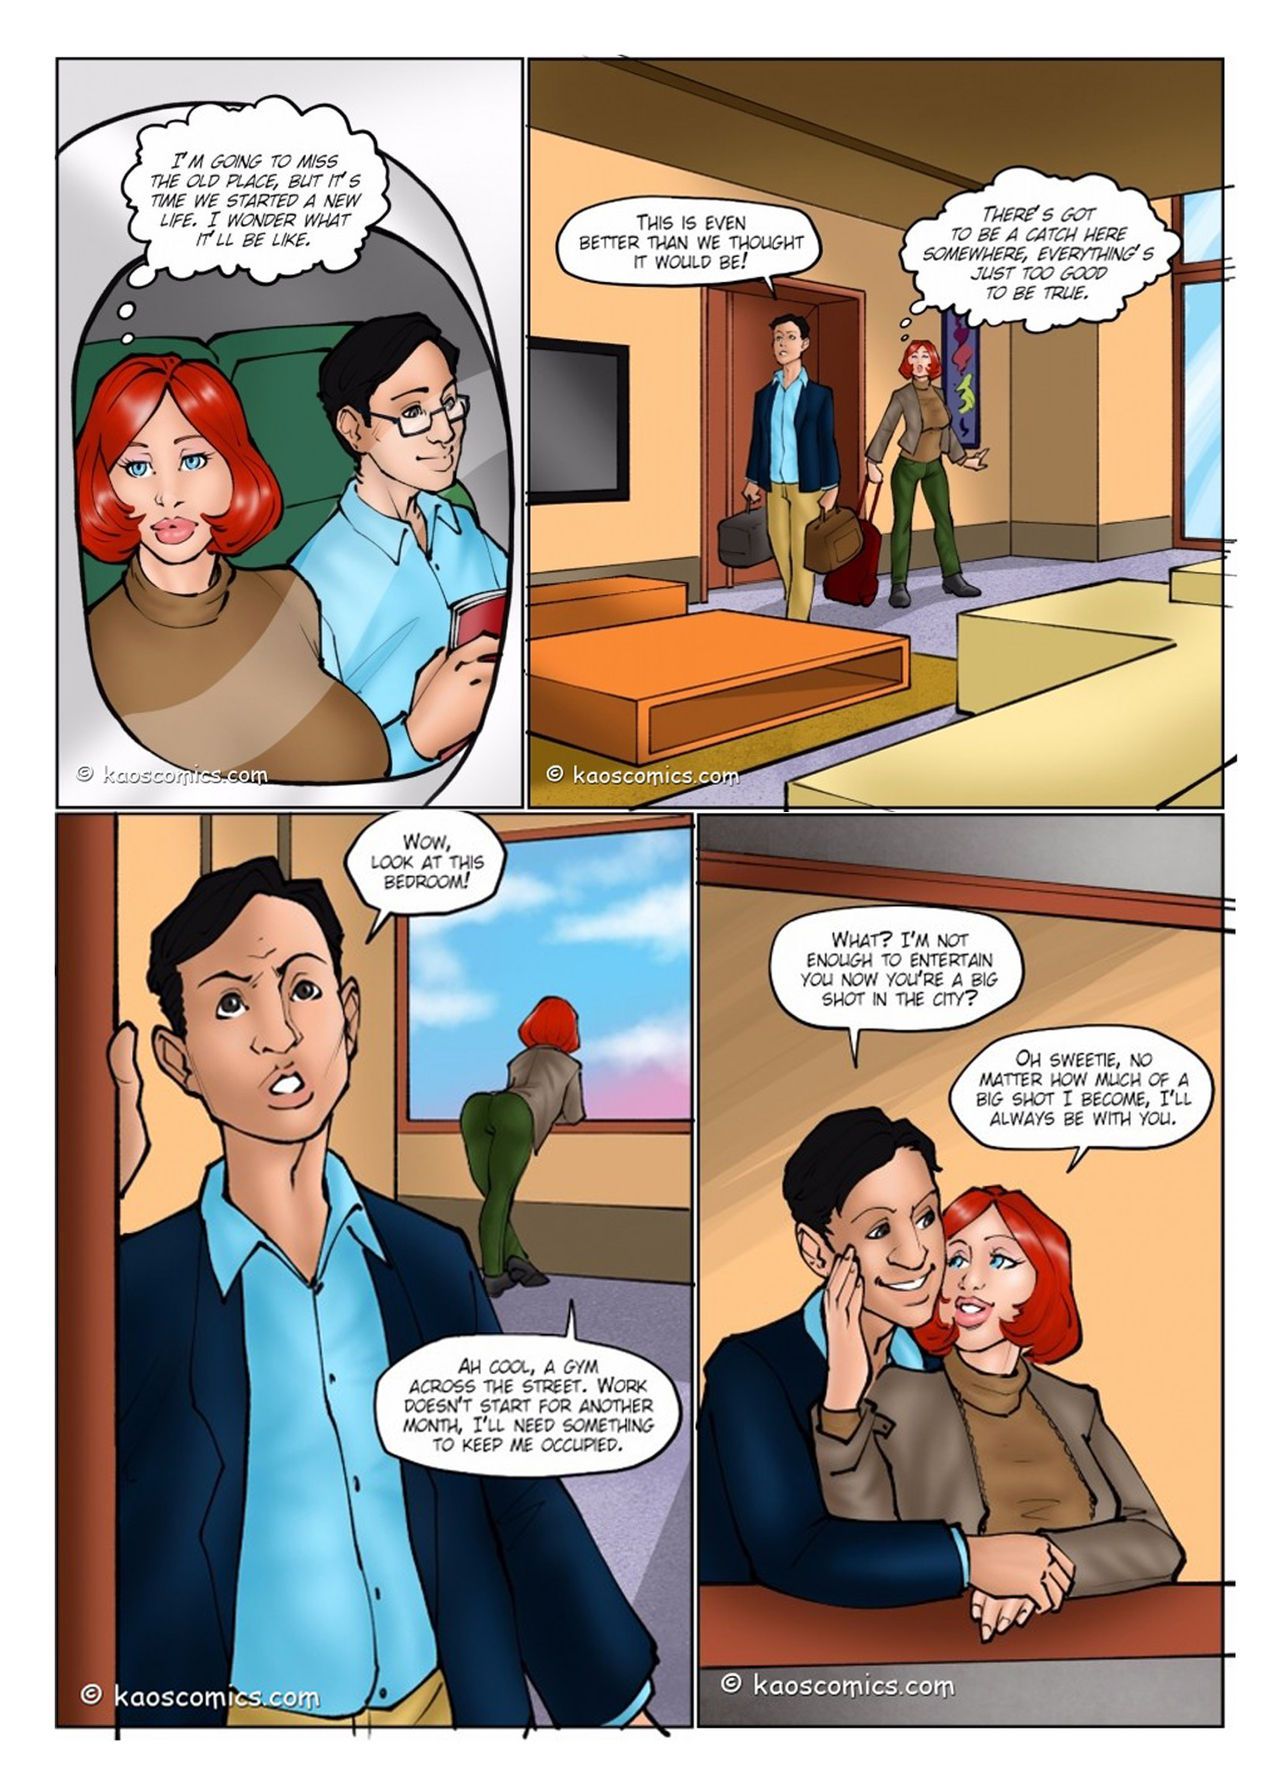 [Kaos] Annabelle's New Life 1 (Full Pages) 3